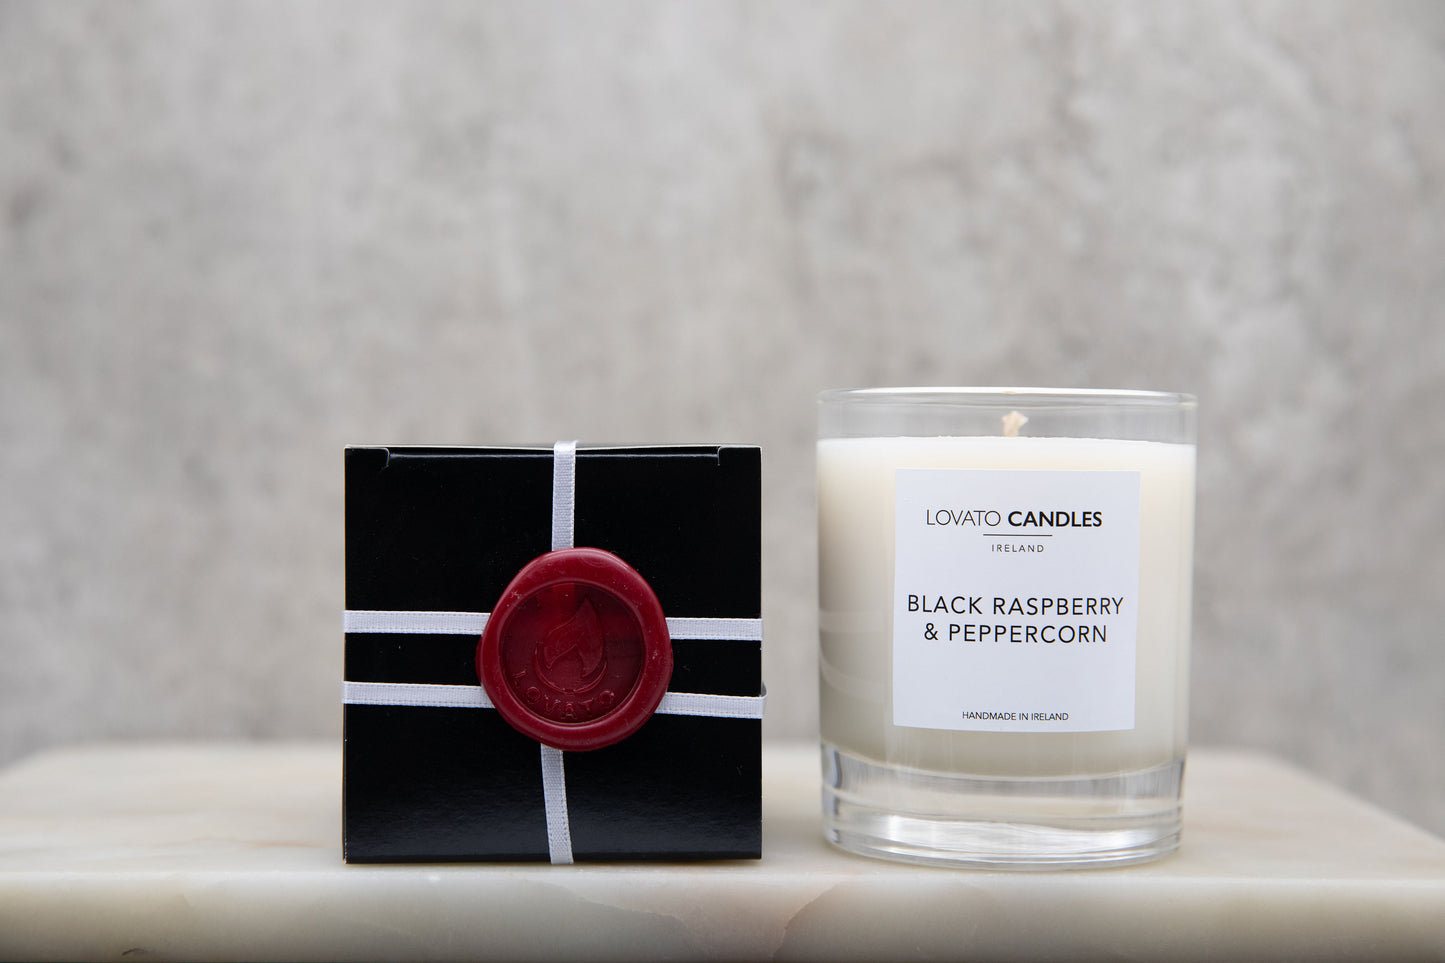 Clear Scented Candle with Luxury Black Box - Black Raspberry & Peppercorn